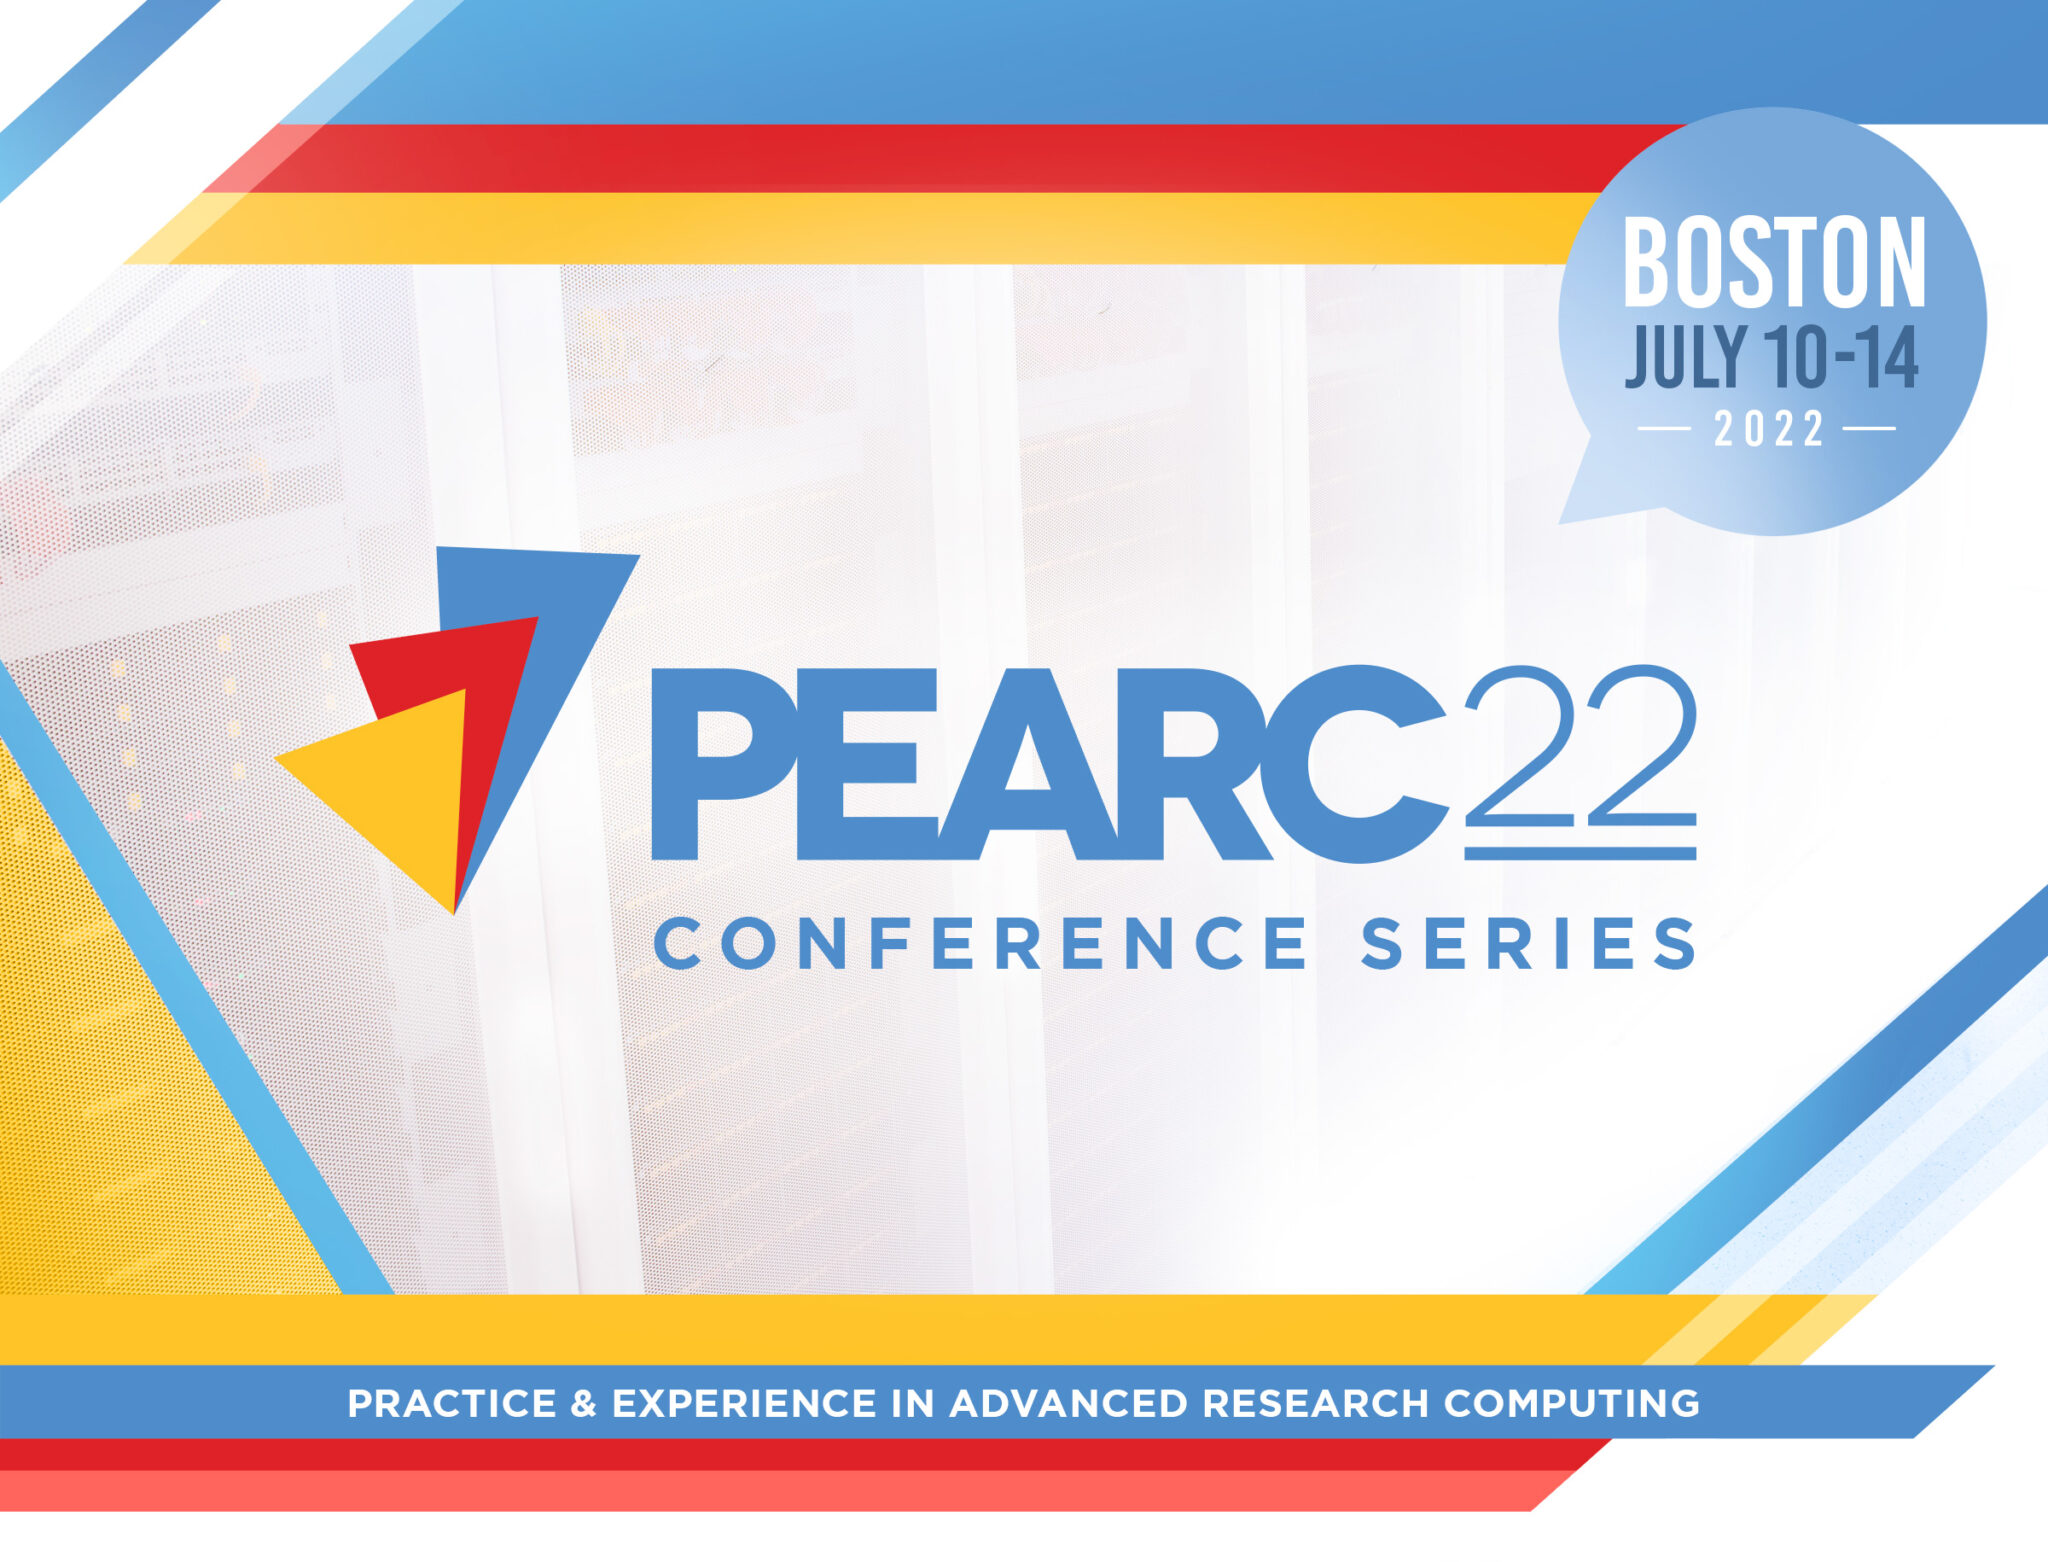 PEARC22 in Boston this Summer